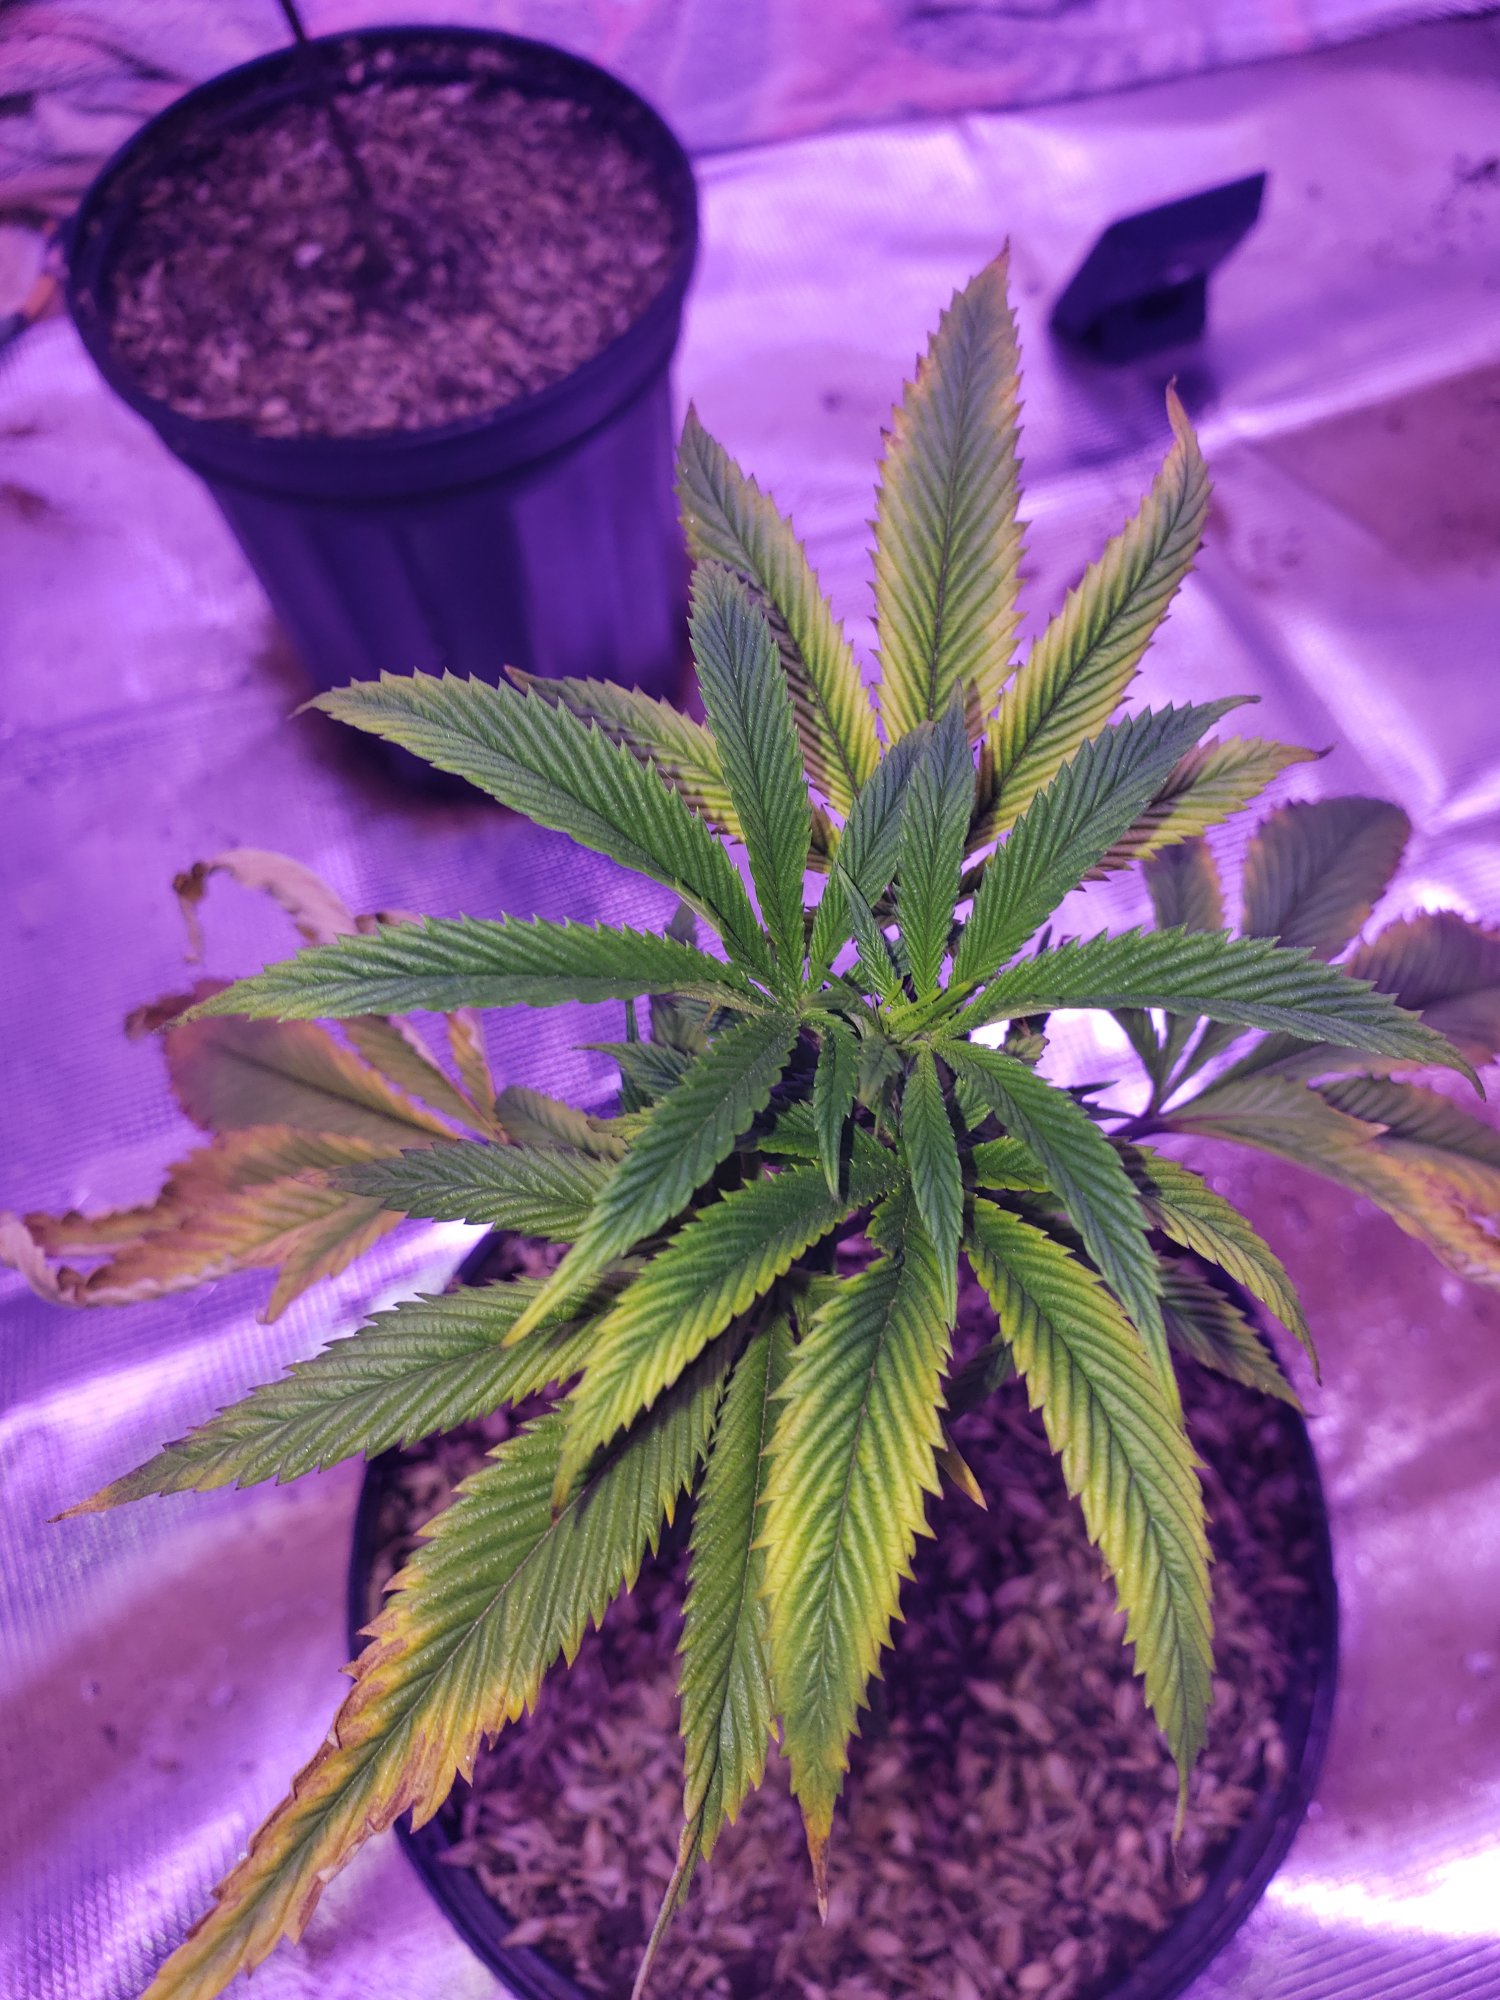 Overwatering caused deficieny help identifying